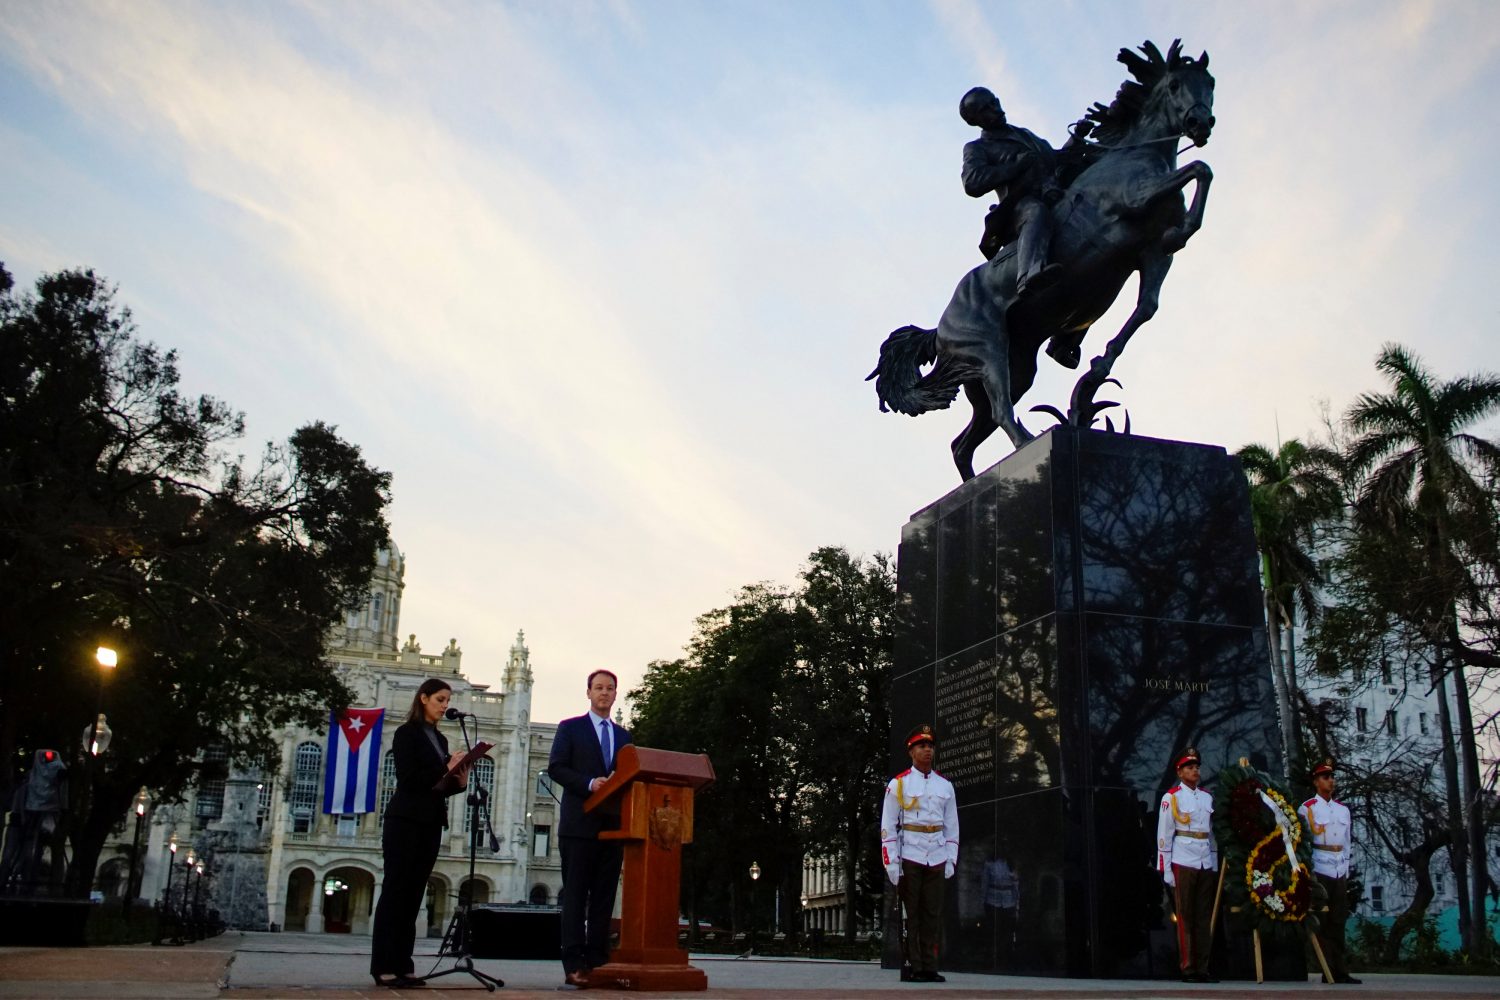 Joseph Mizzi, chairman of the Bronx Museum of the Arts’ board of trustees speaks during a ceremony to inaugurate a replica of New York’s statue of Cuba’s independence hero Marti in Havana, Cuba, January 28, 2018. REUTERS/Alexandre Meneghini